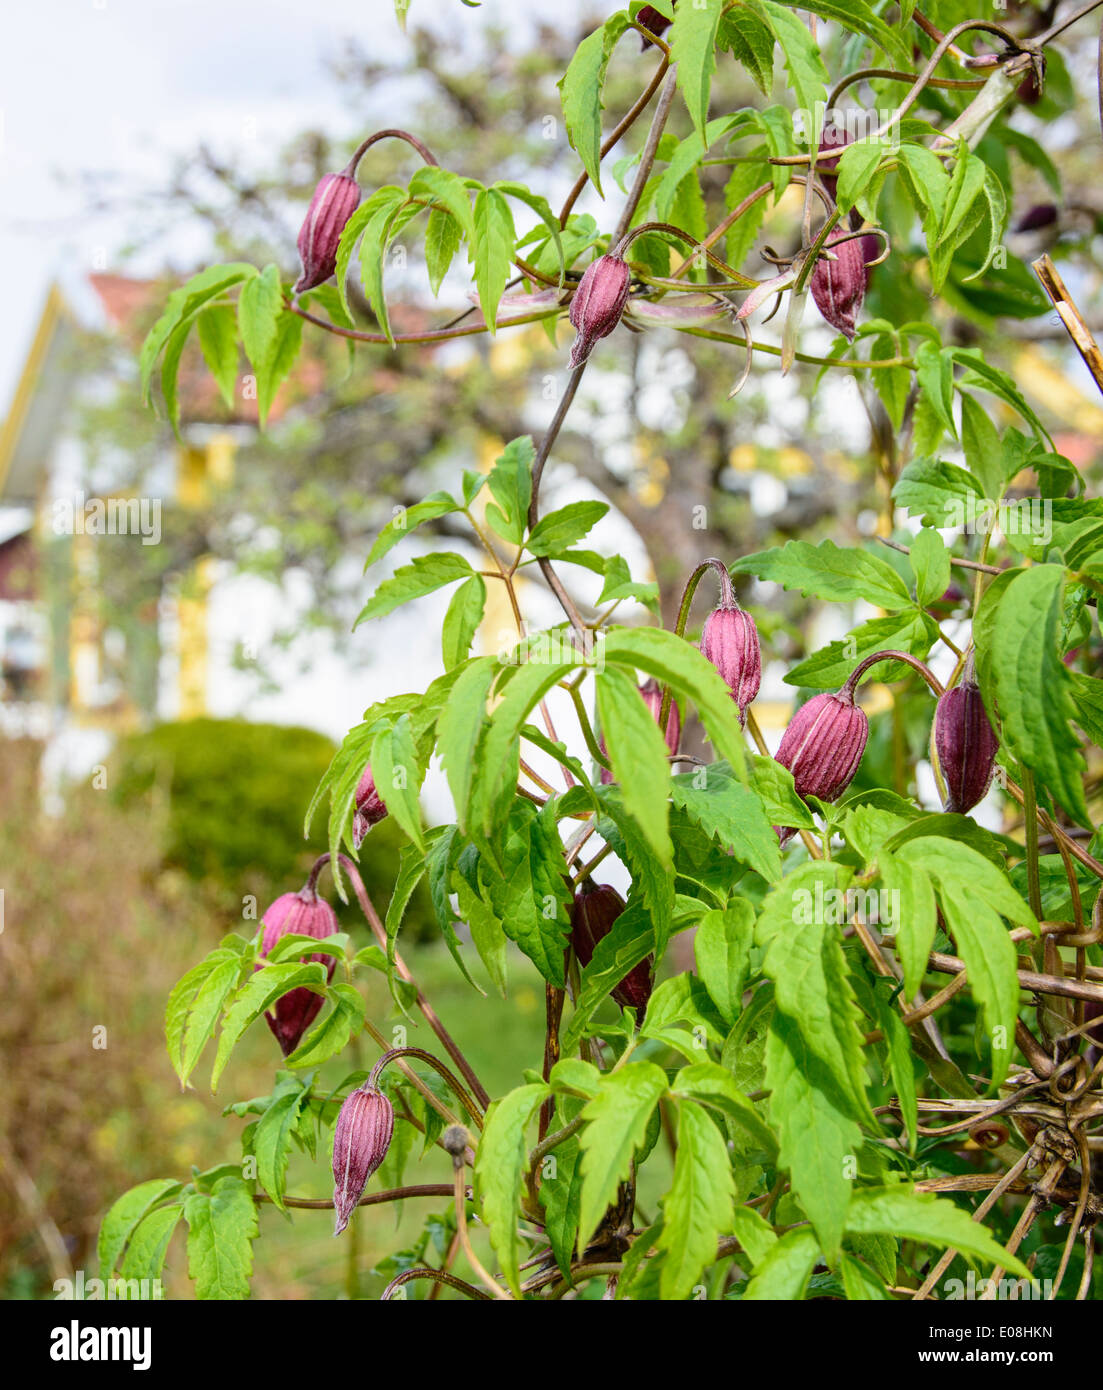 Clematis plant. Clematis with budding flowers and foliage, Stockholm, Sweden in May. Stock Photo